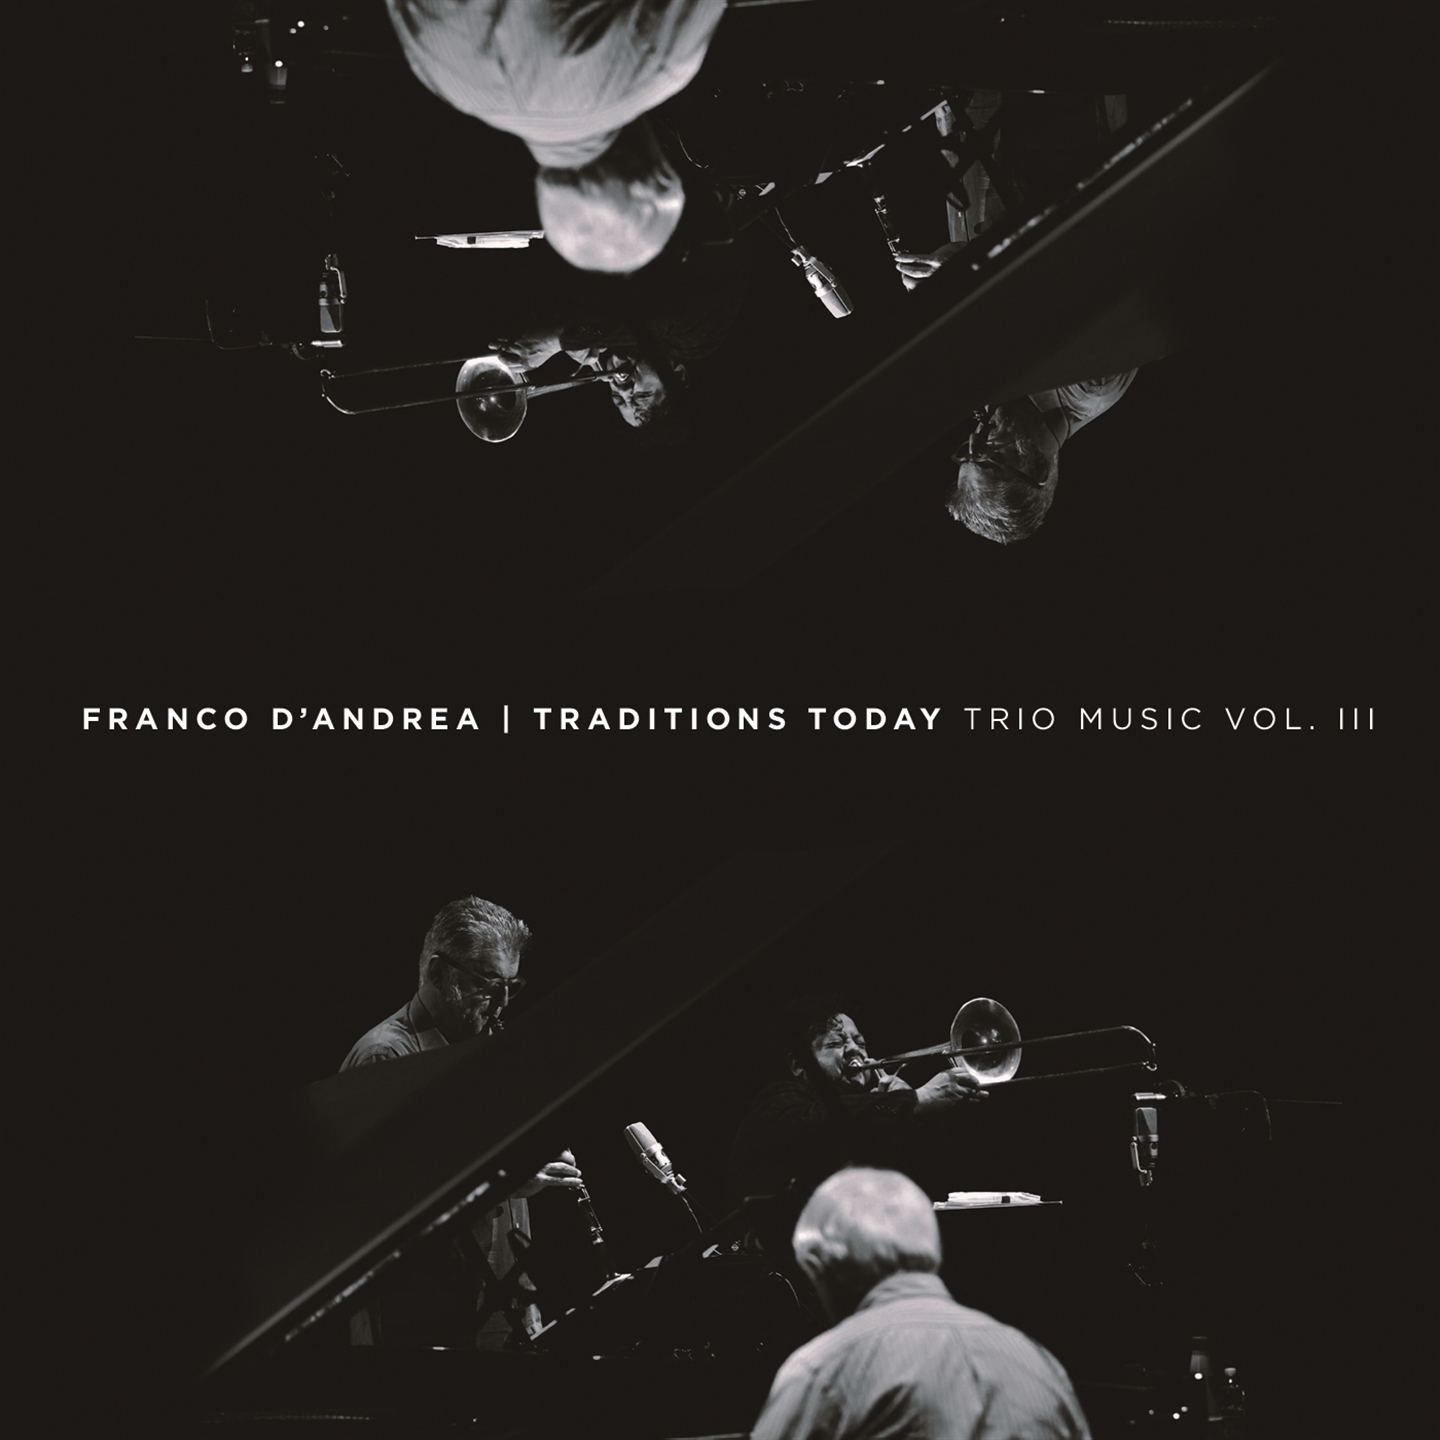 TRADITIONS TODAY - TRIO MUSIC VOL III